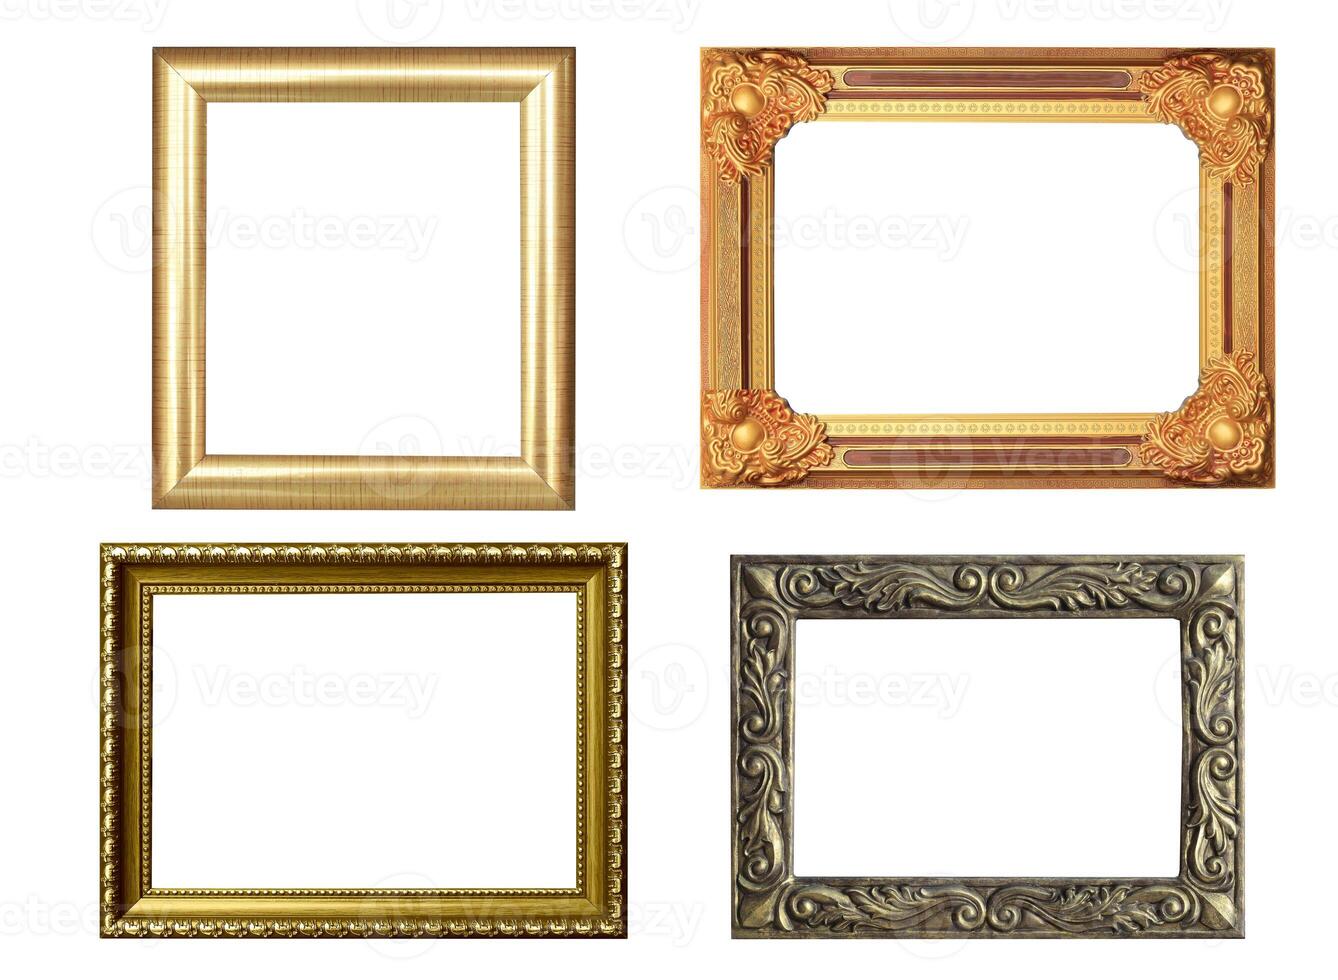 Set of golden frame and wood vintage isolated on white background. photo